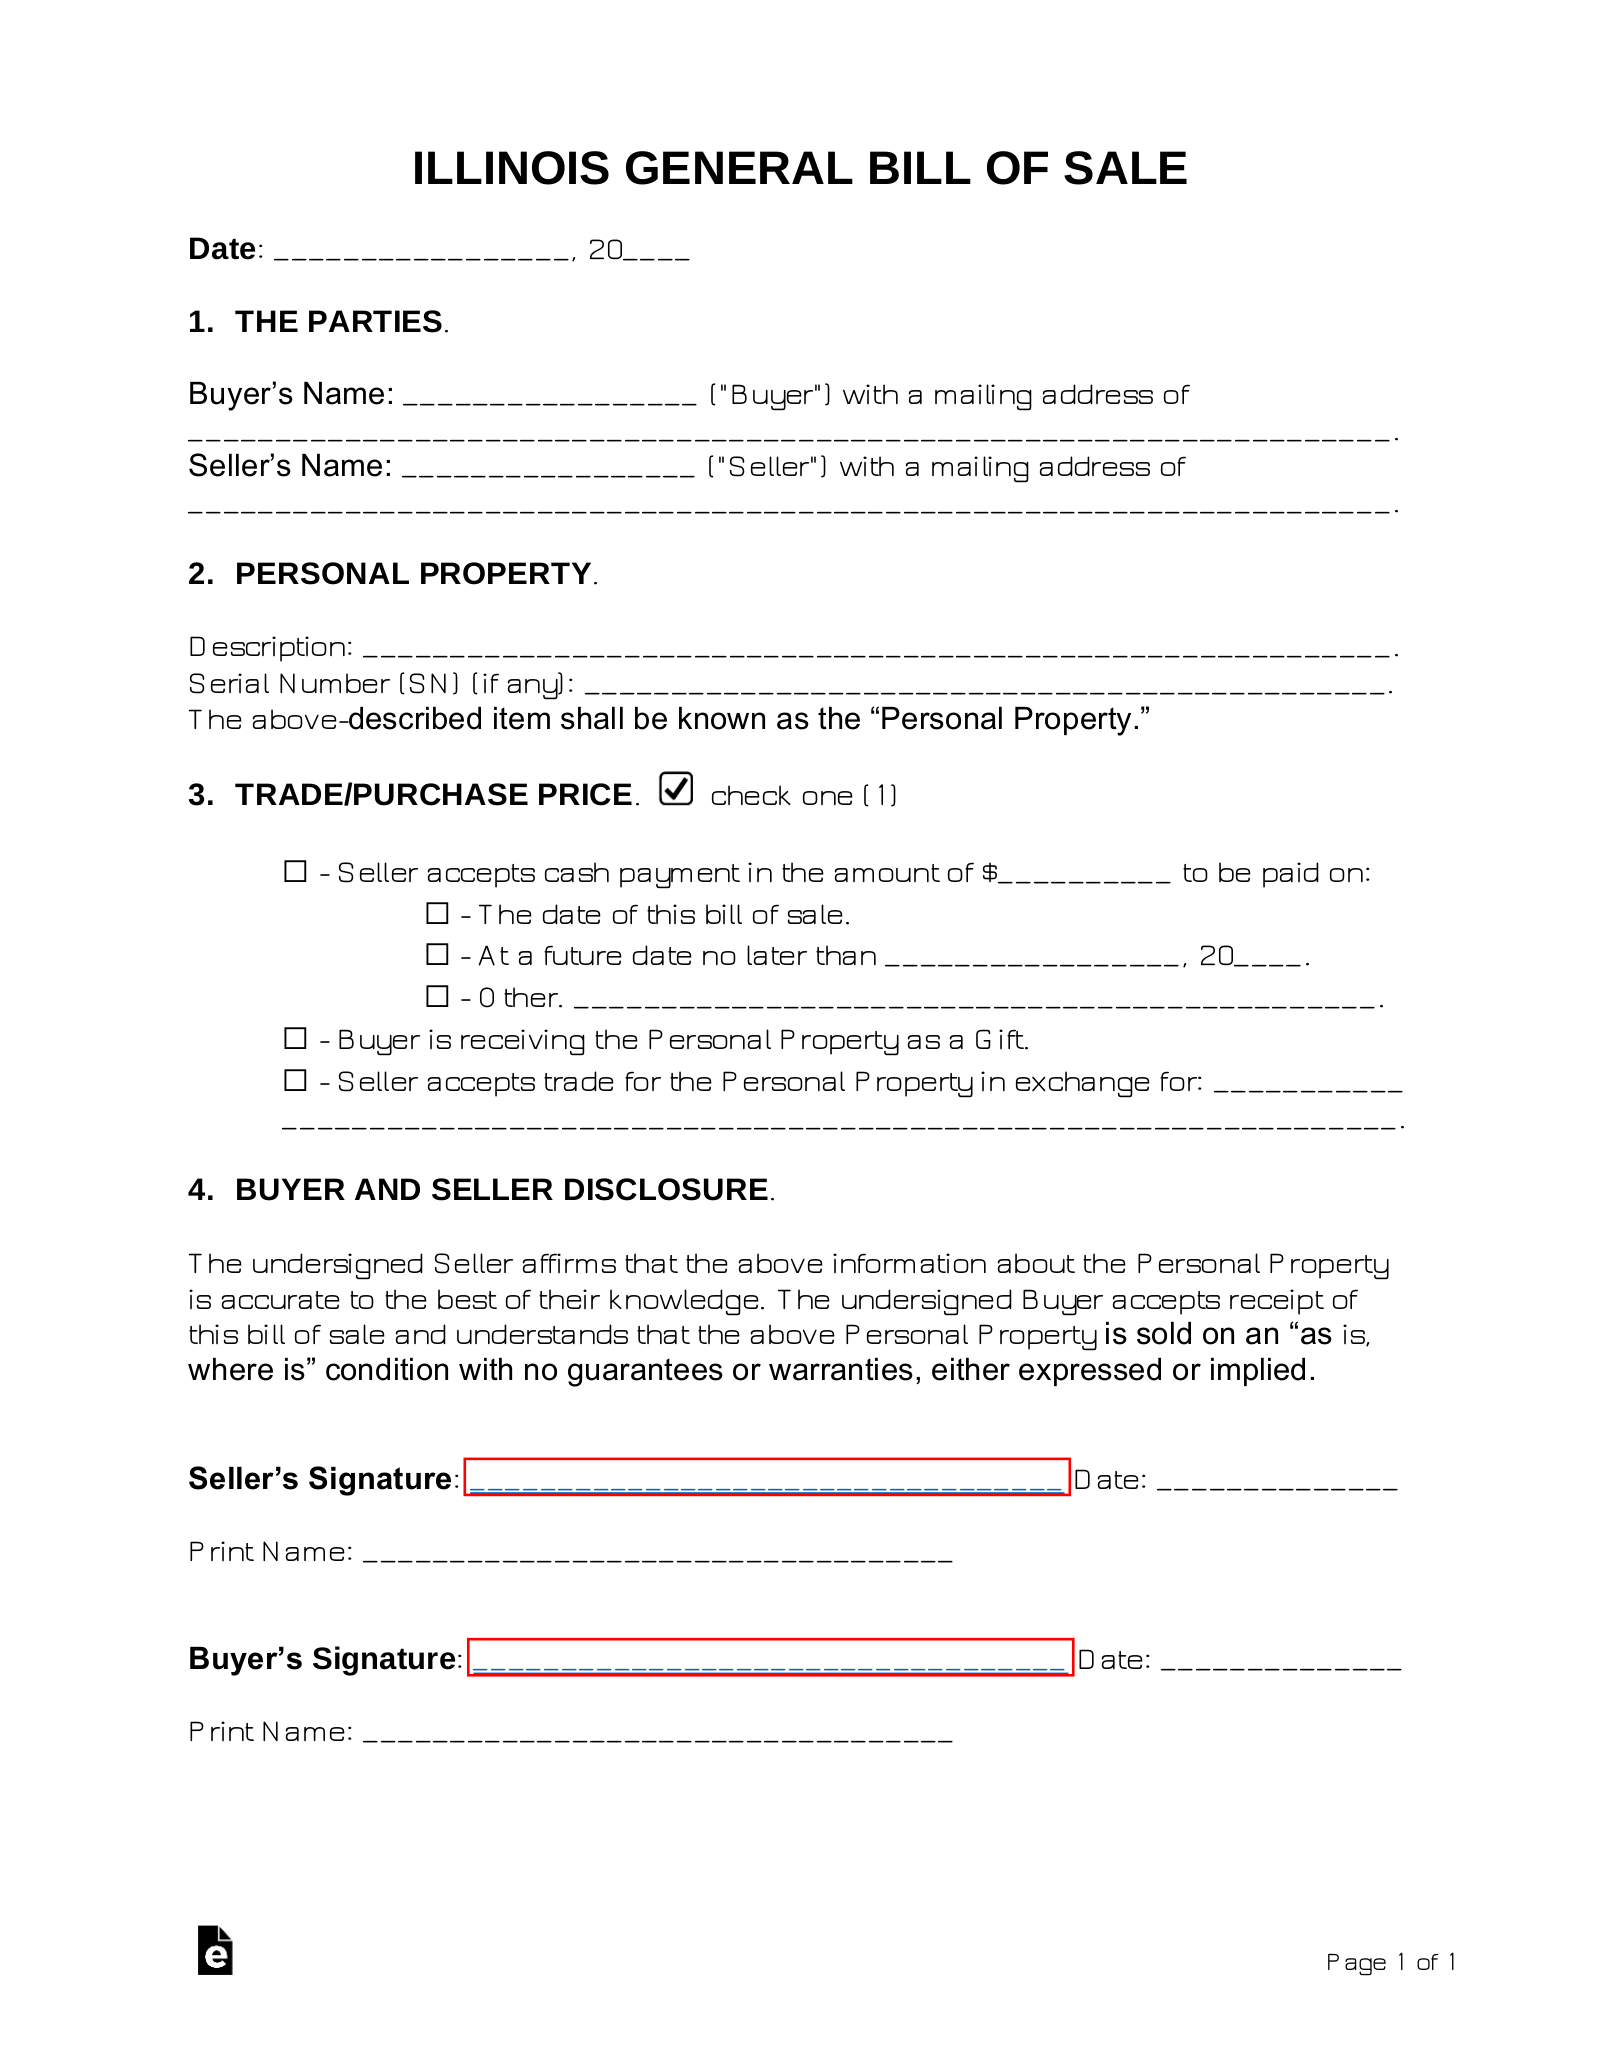 Illinois General Bill of Sale Form